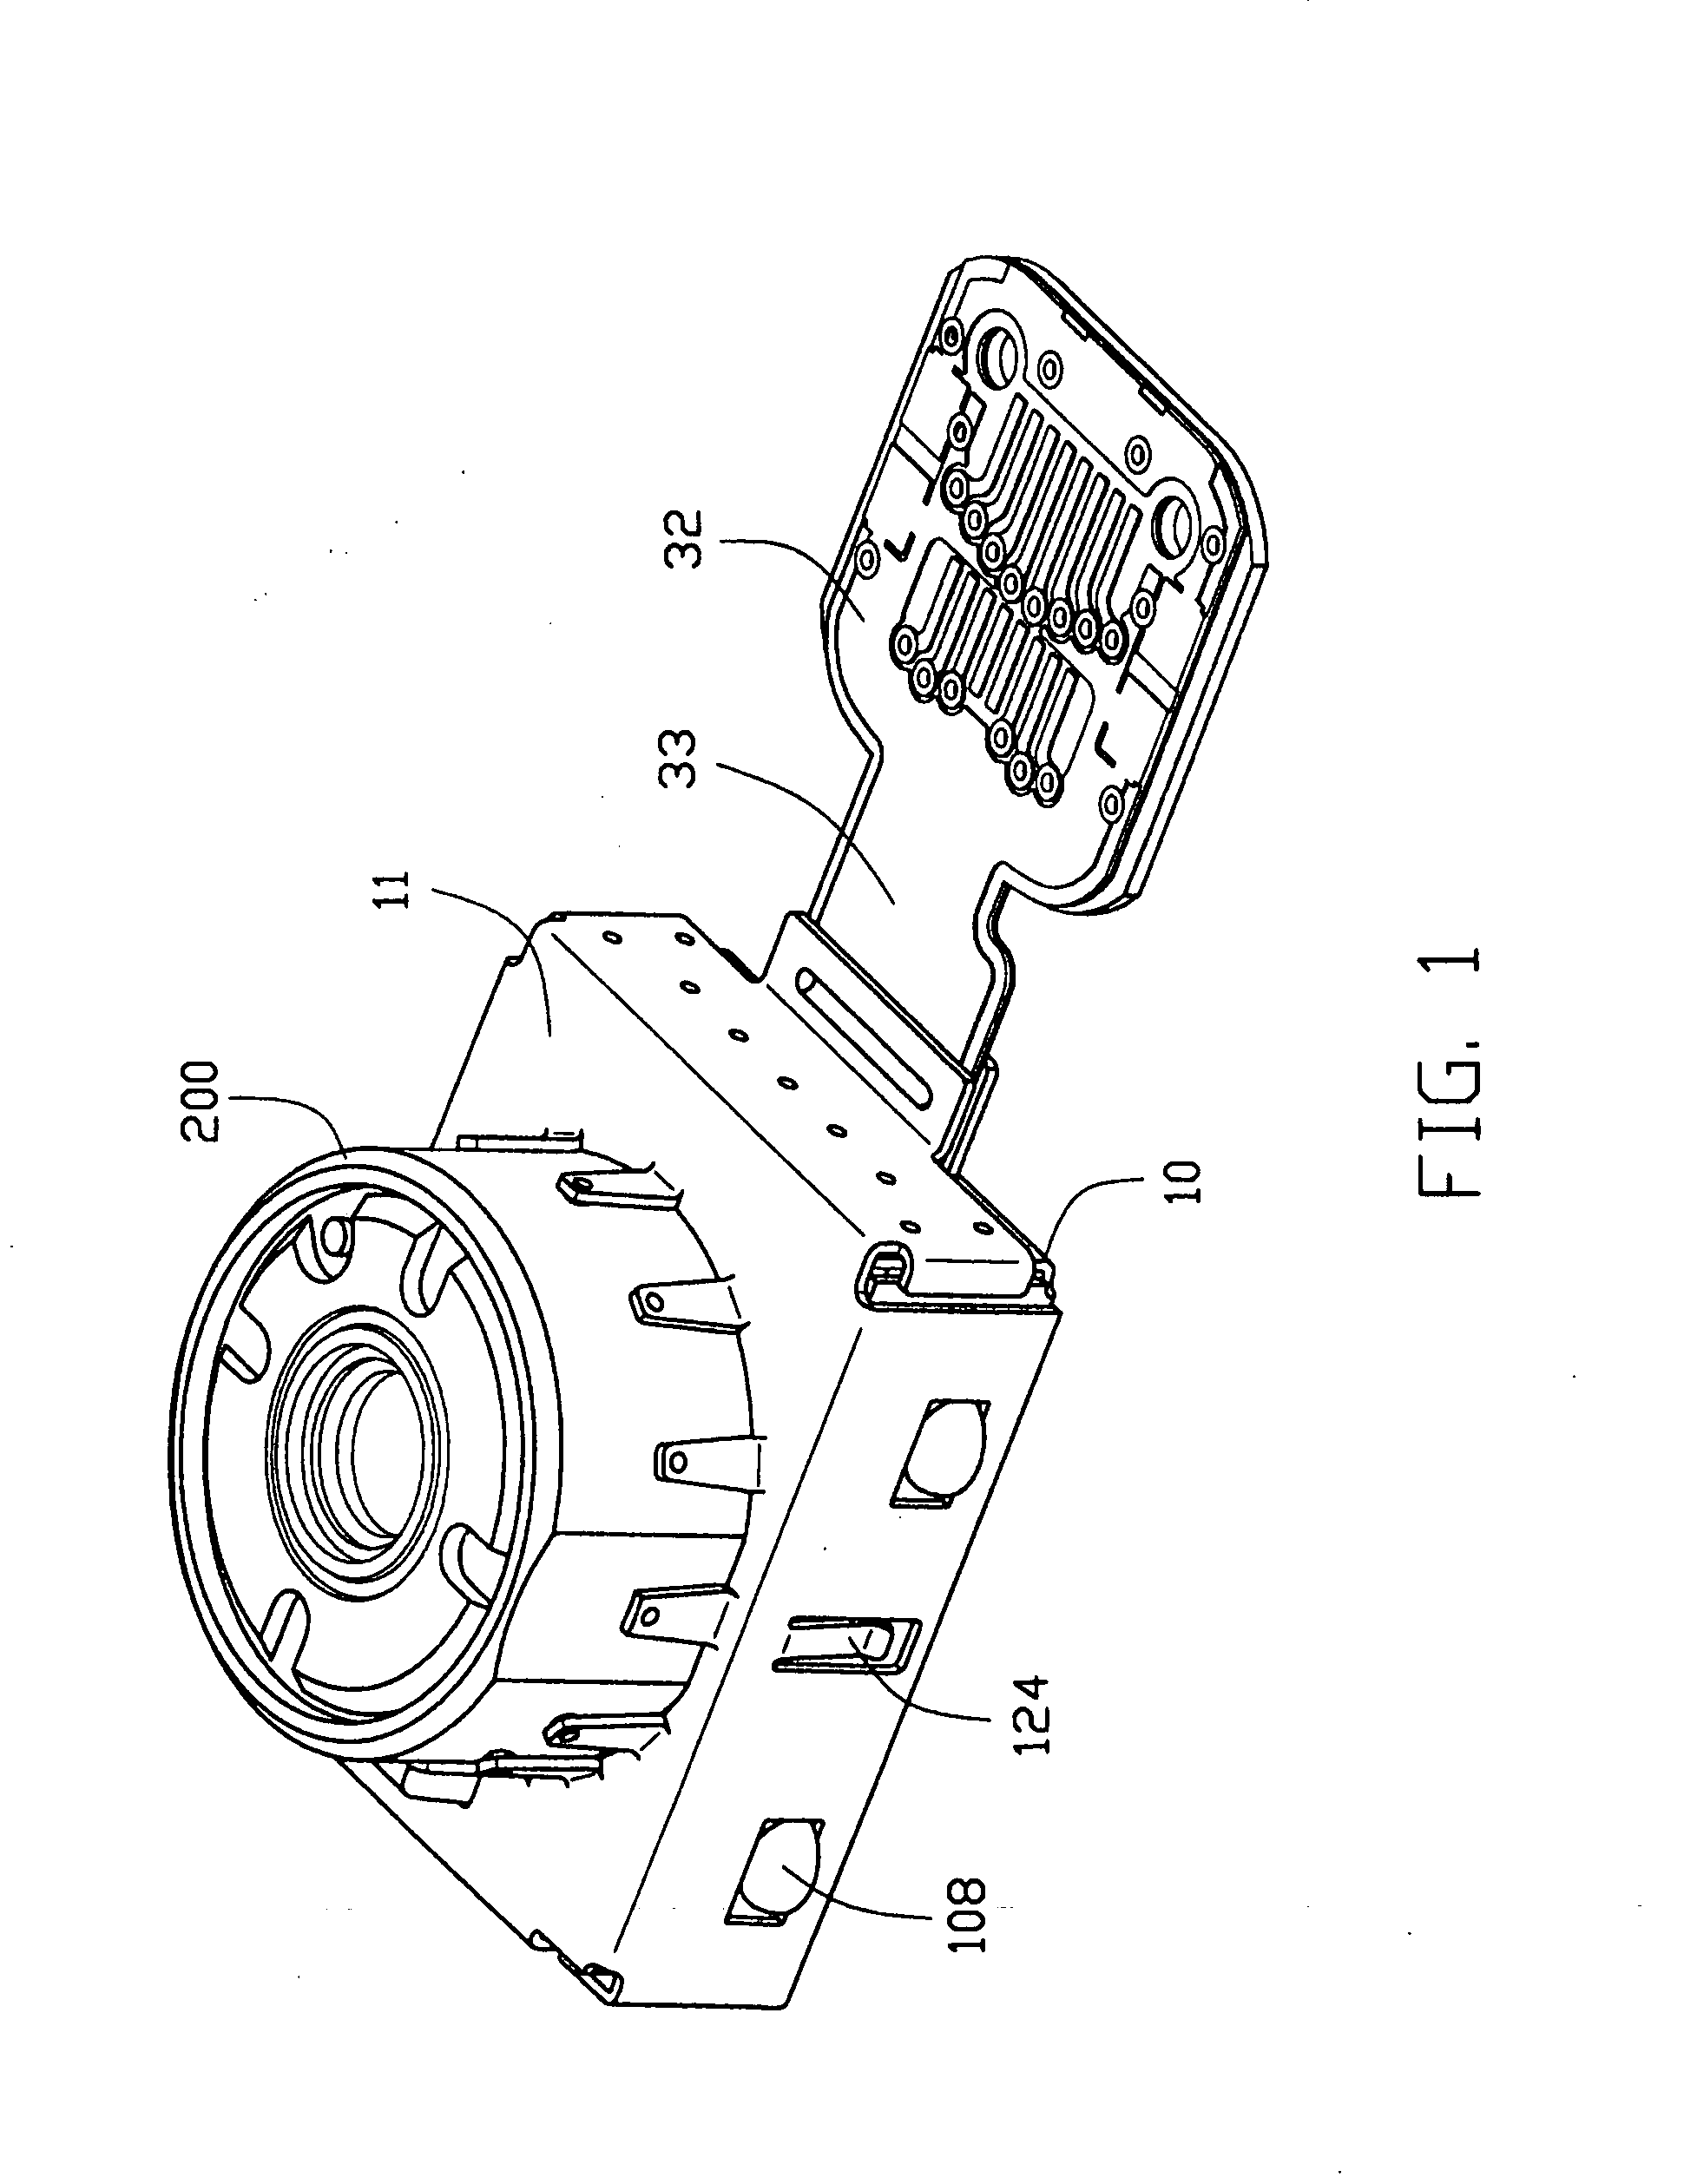 Electrical connector with support element